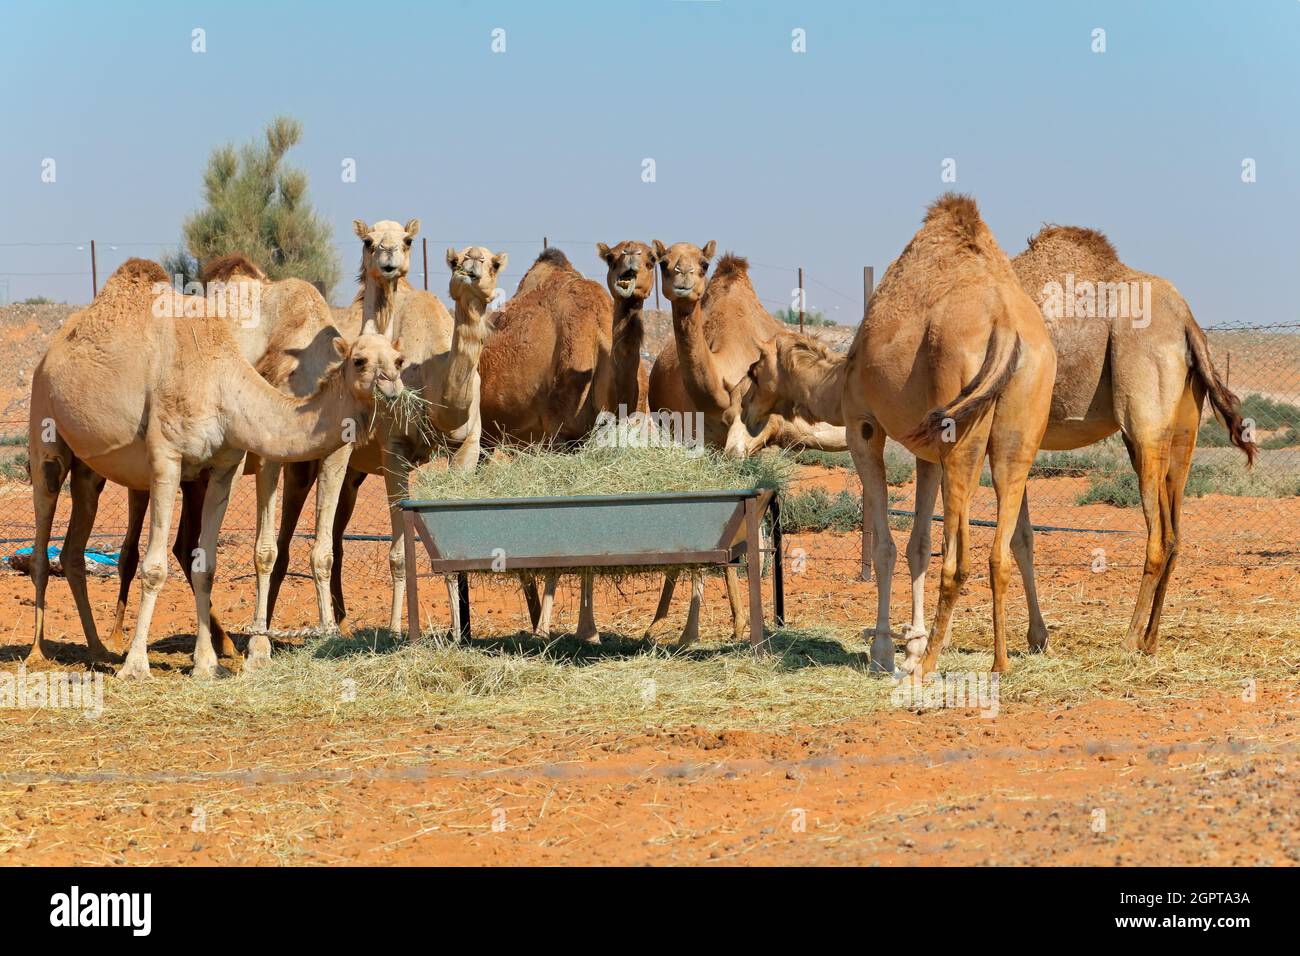 Group Of Camels At A Feeding Trough In A Rural Area Of The United Arab  Emirates Stock Photo - Alamy